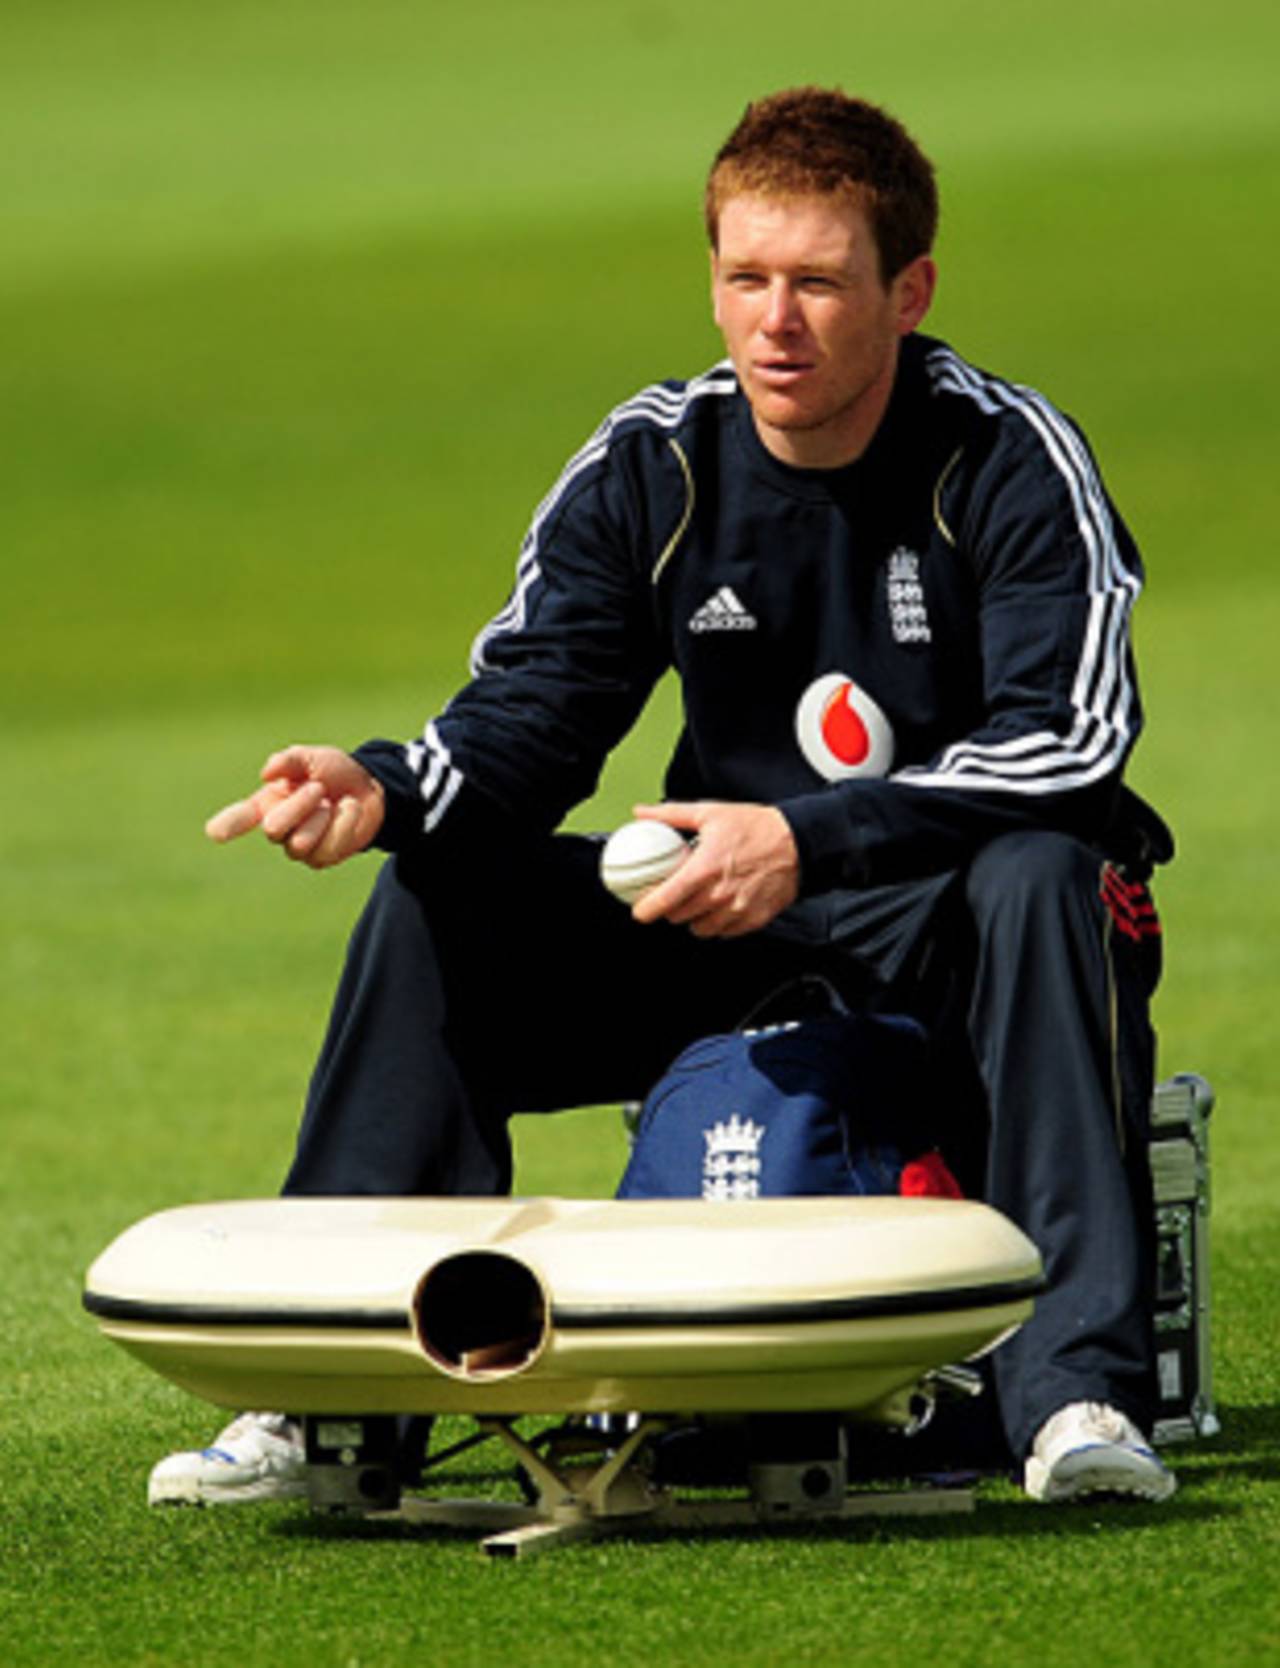 Eoin Morgan feeds balls into the bowling machine as England warm-up for the first ODI against West Indies, Headingley, April 20, 2009